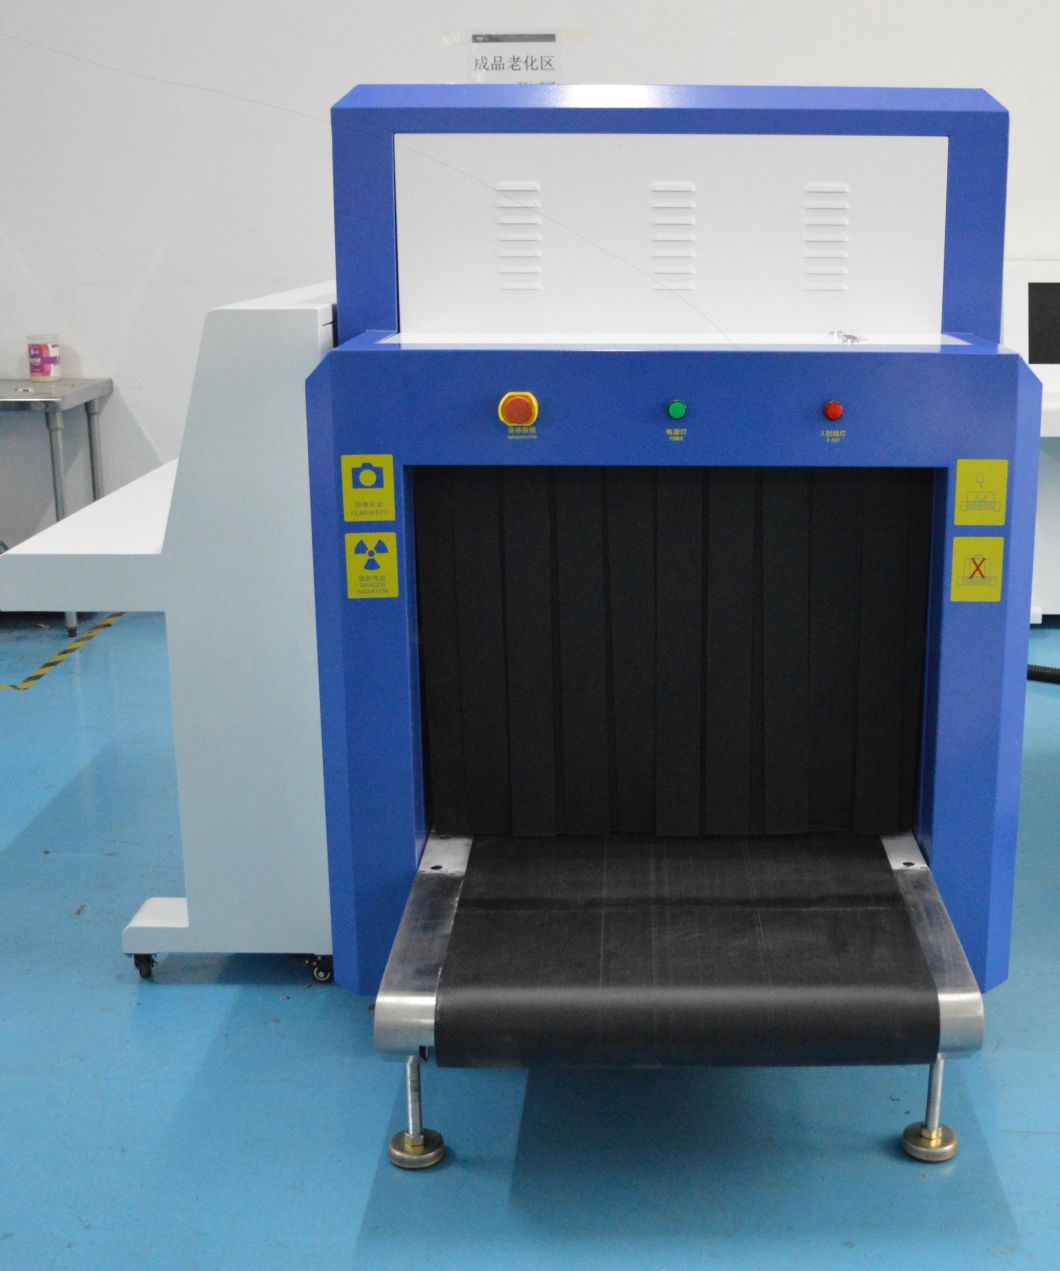 Airport X-ray Security Baggage & Luggage Scanning Inspection Scanner for Military, Government, Commercial Building